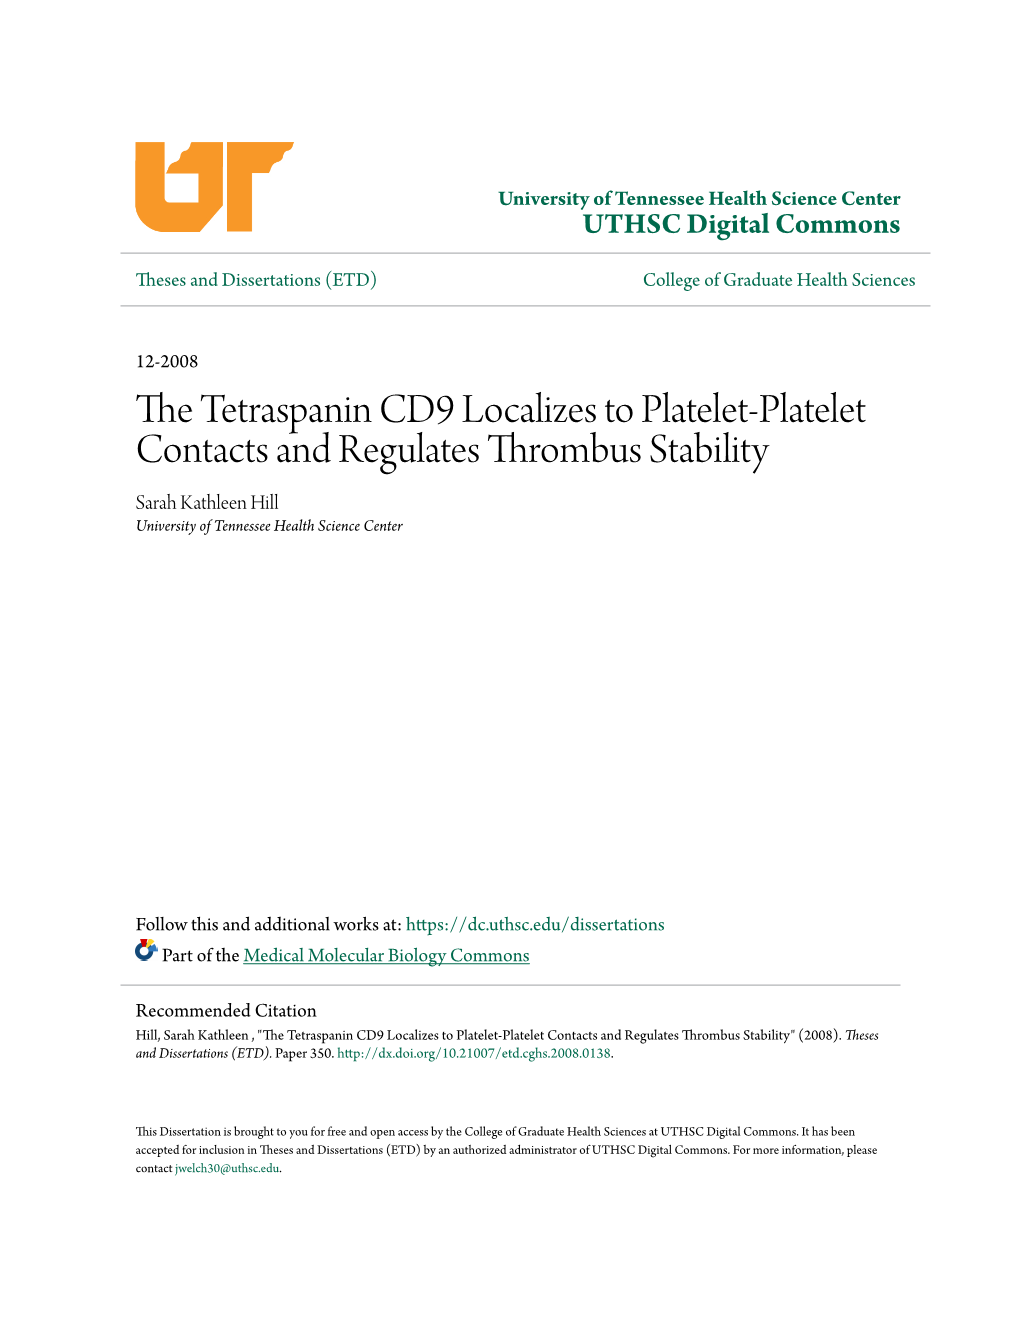 The Tetraspanin Cd9 Localizes to Platelet-Platelet Contacts and Regulates Thrombus Stability